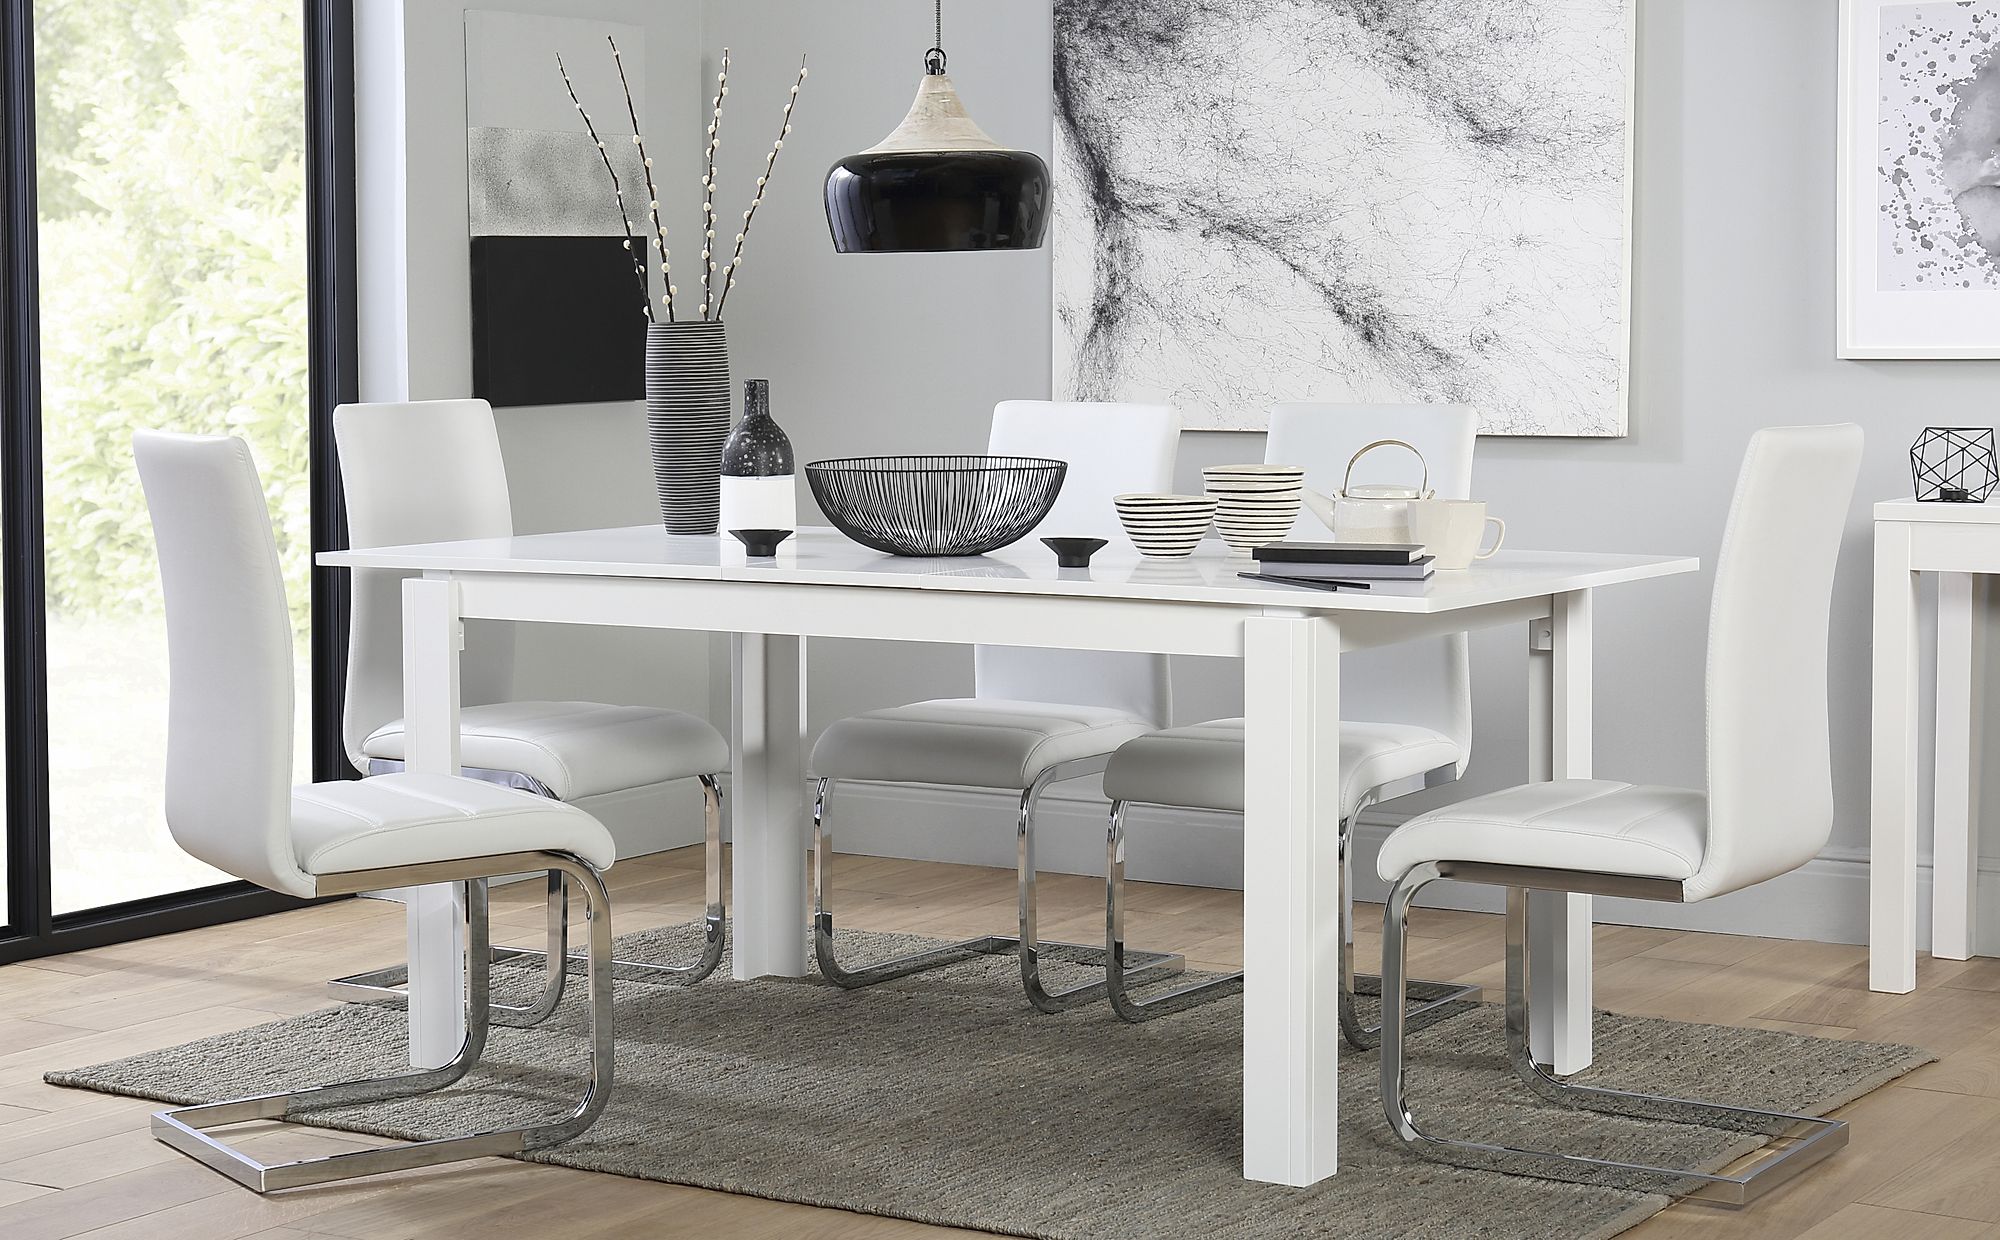 Dining Room Table With White Leather Chairs